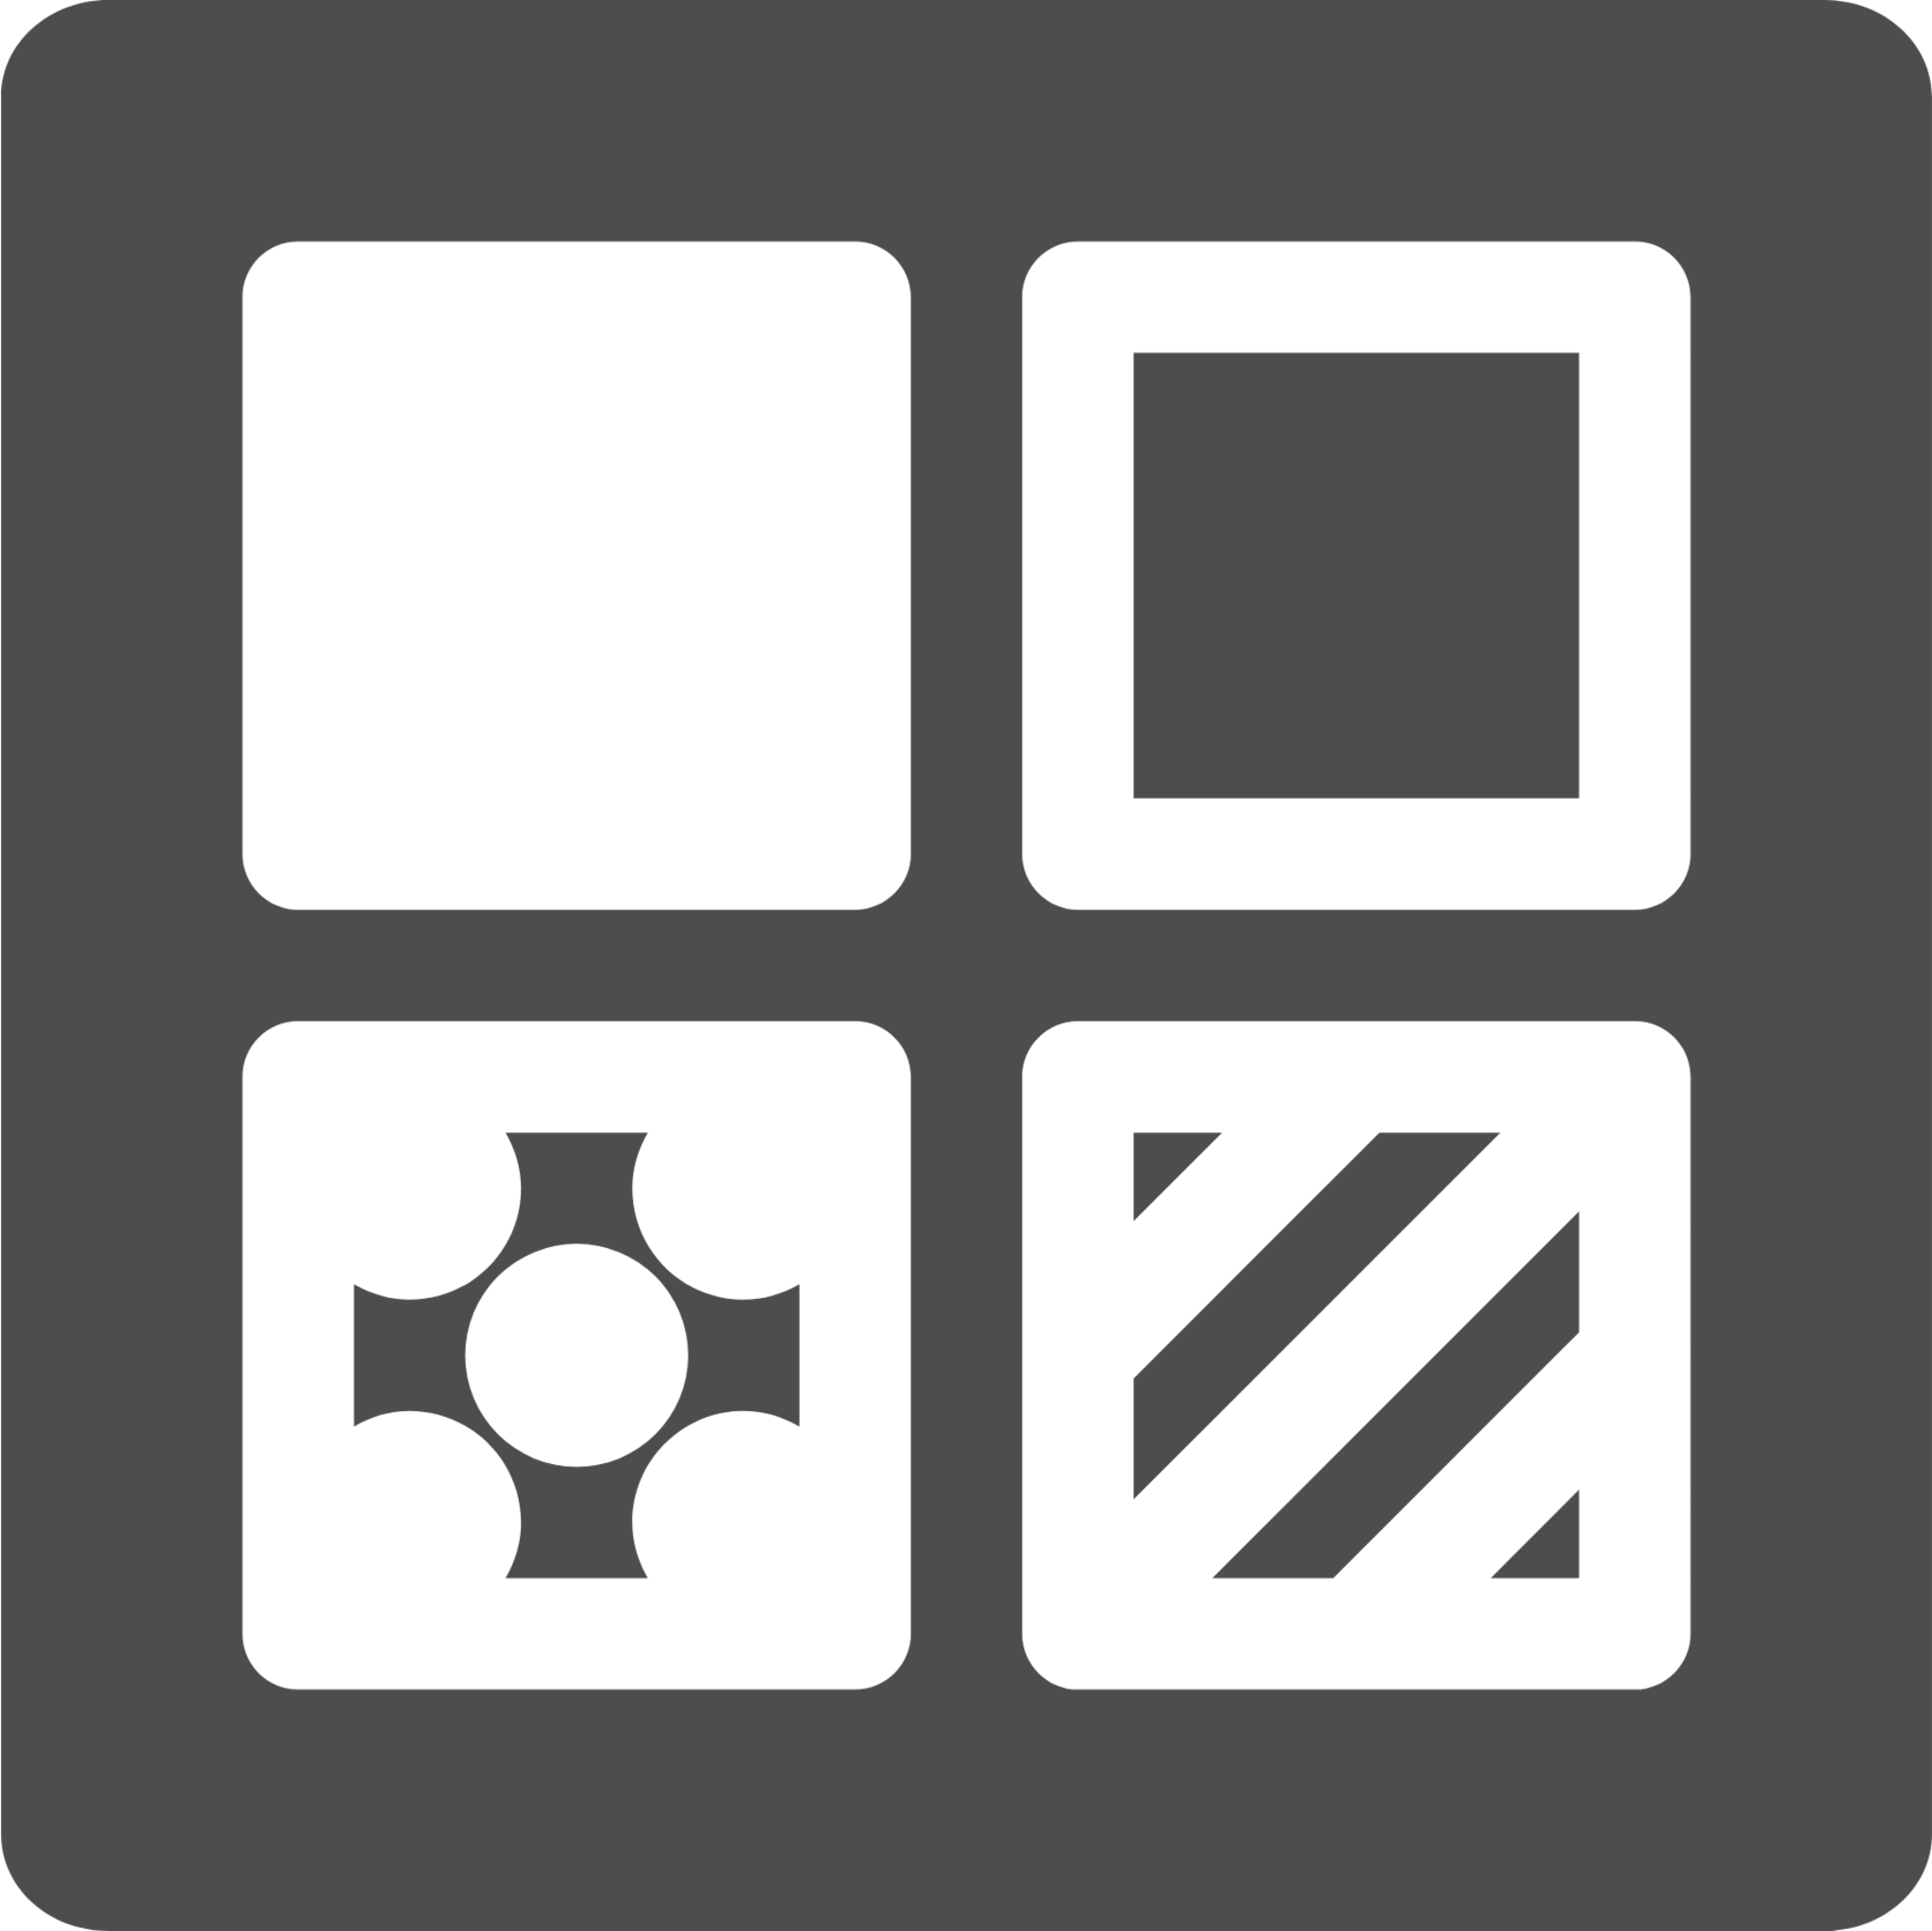 view categories icon